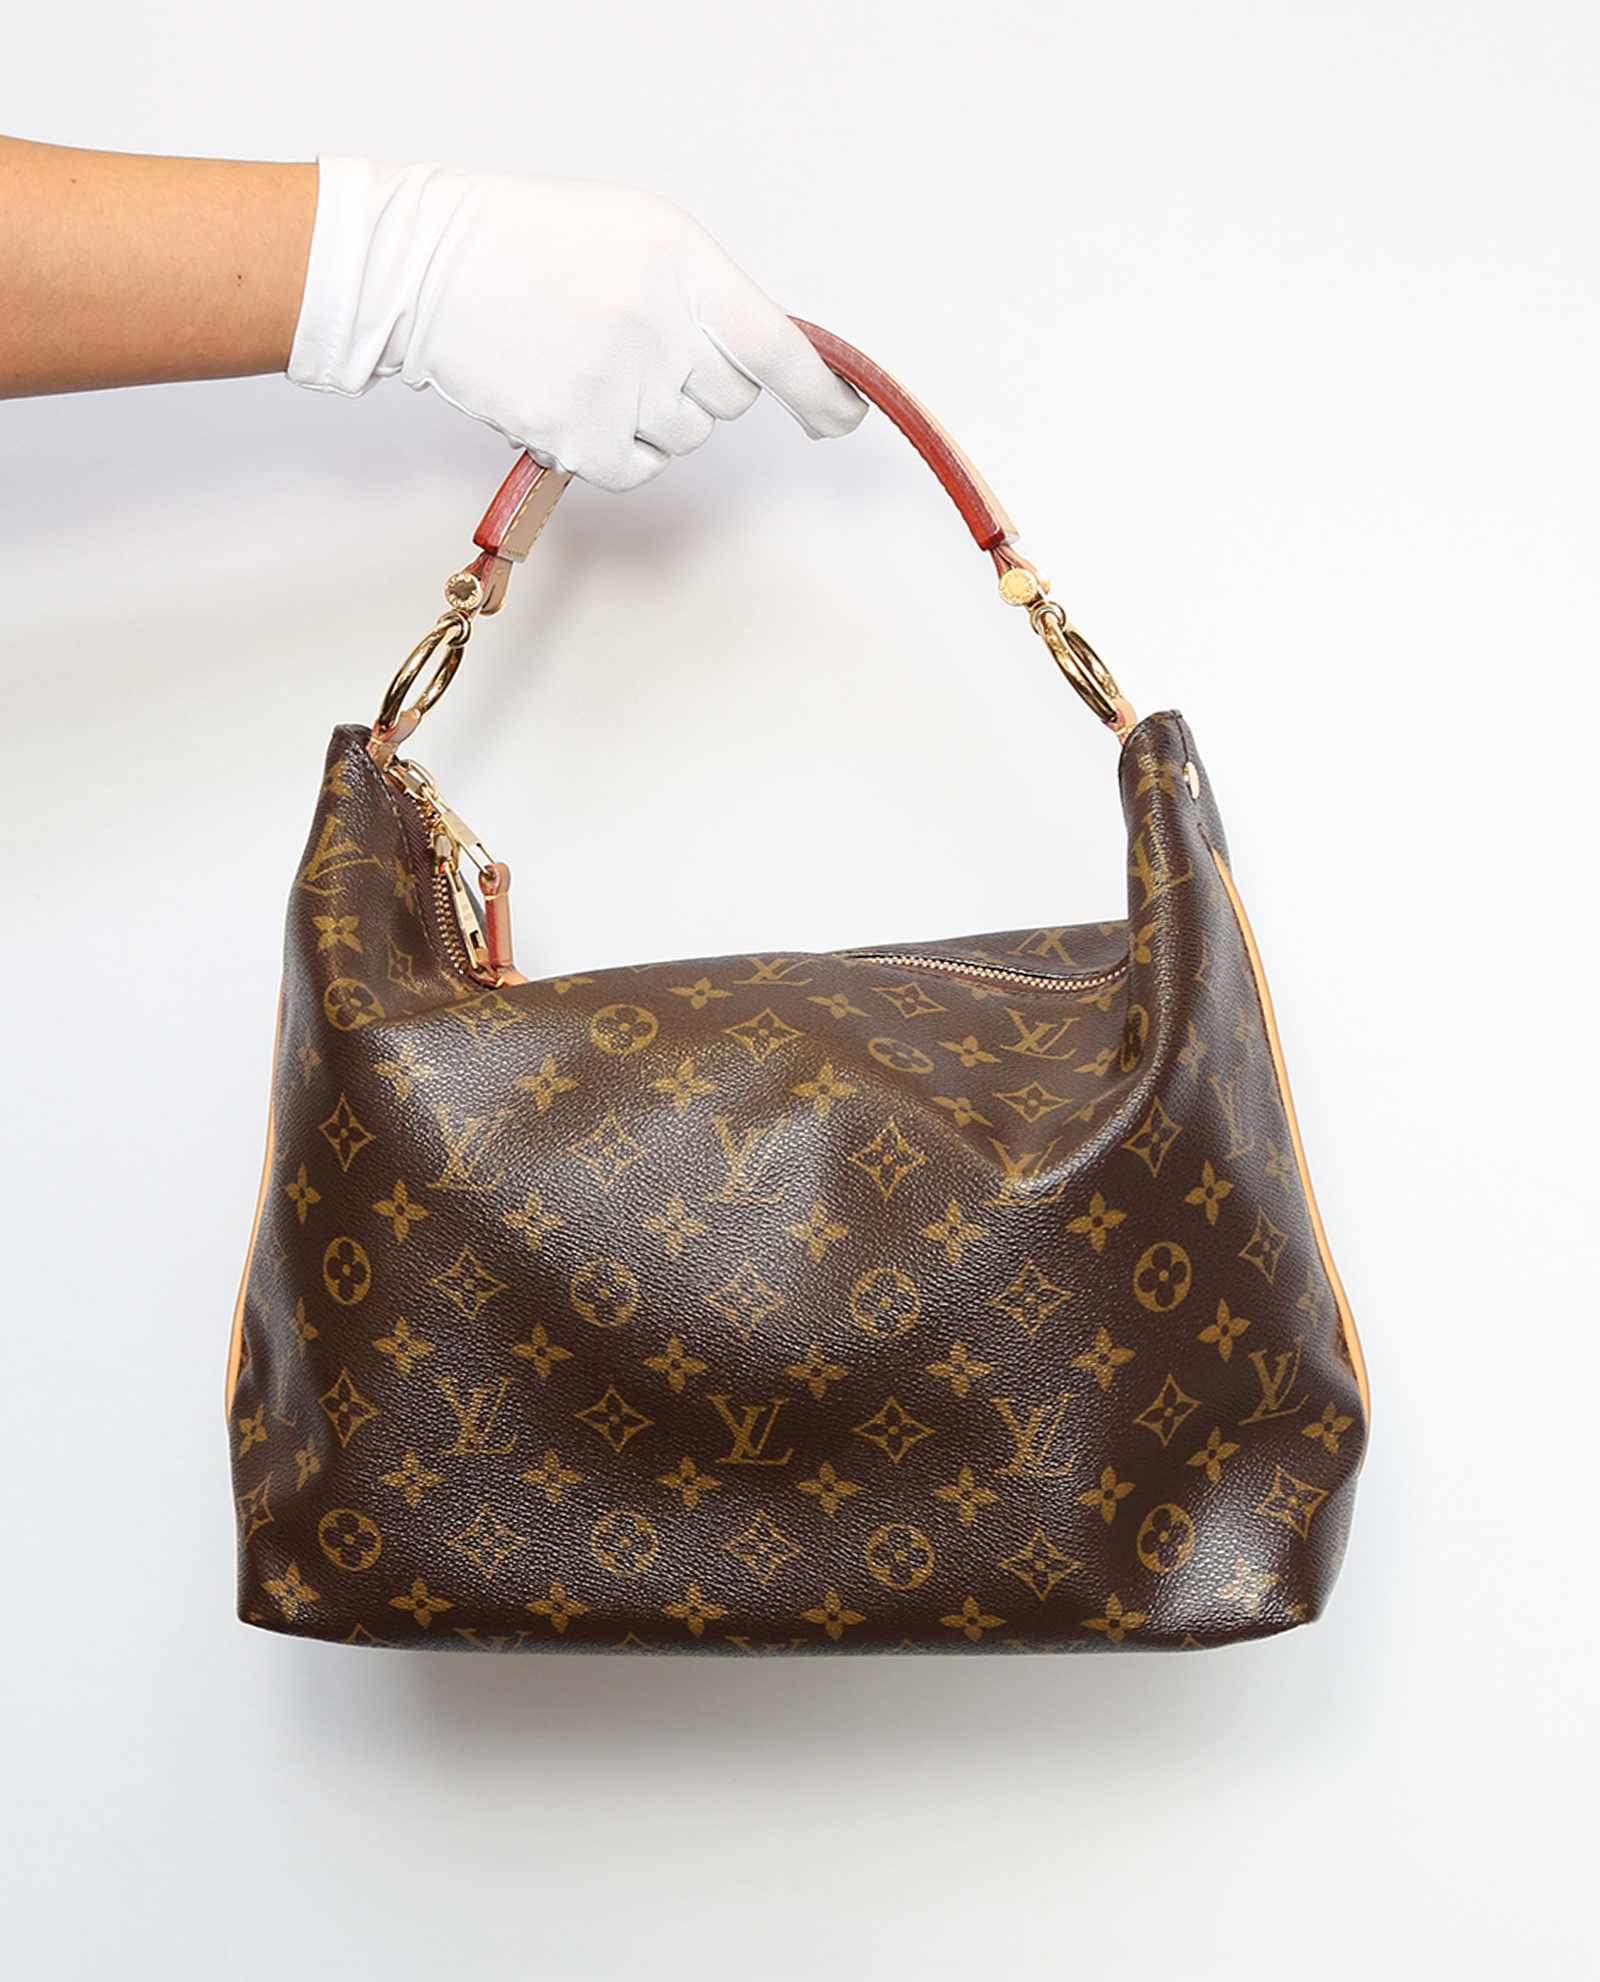 Louis Vuitton Sully PM in Monogram - SOLD